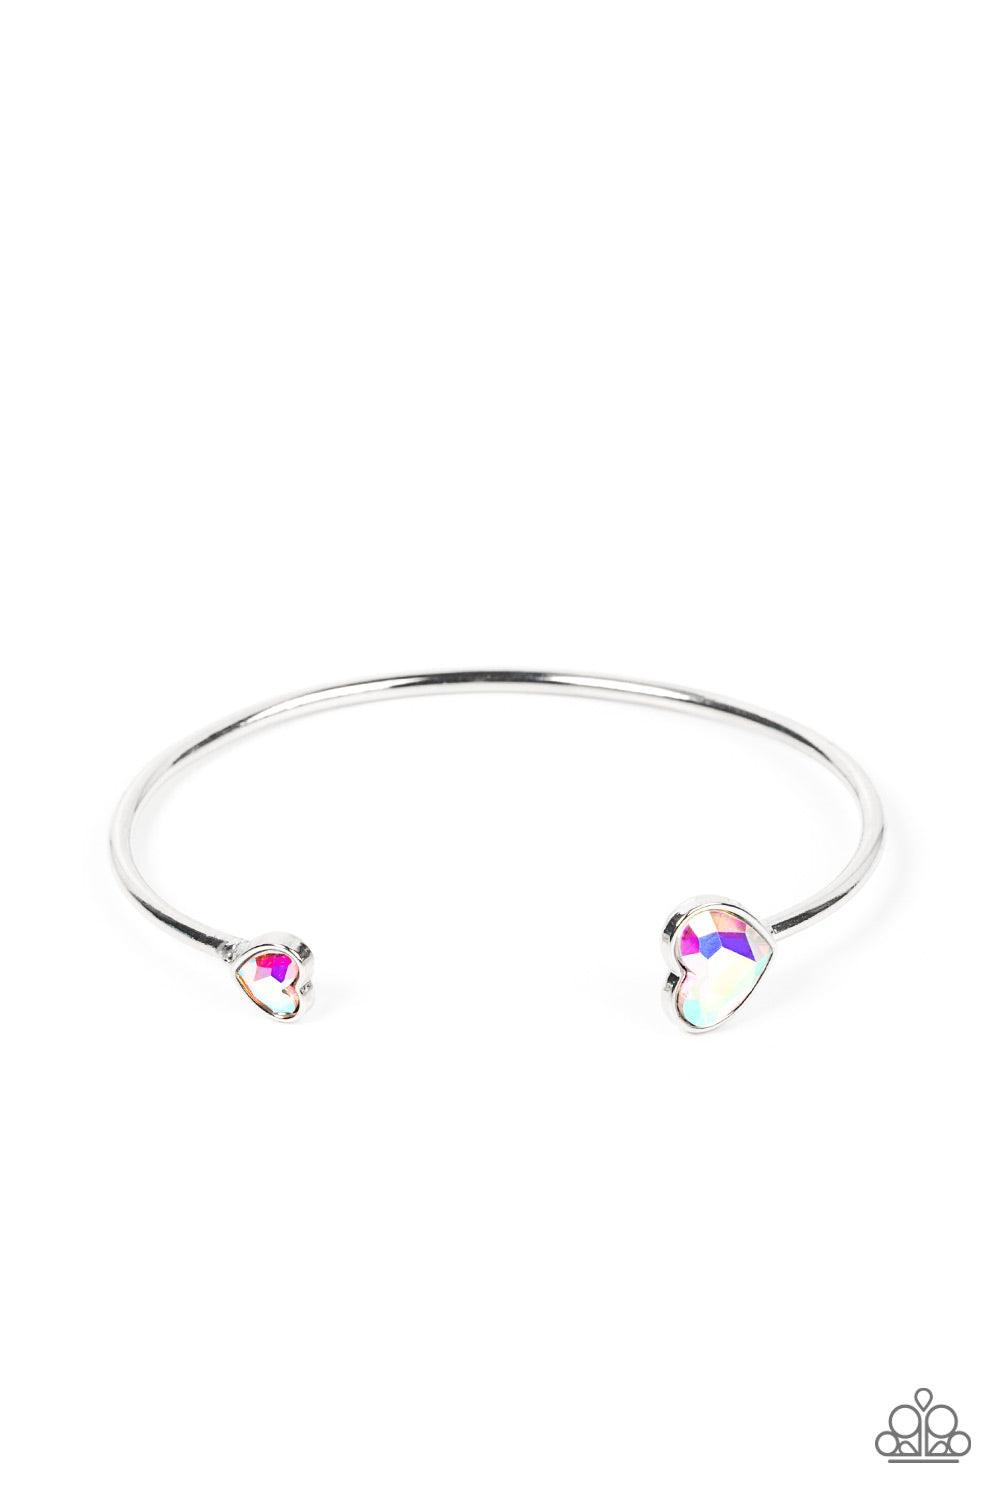 Paparazzi Accessories Unrequited Love - Multi Enhanced with iridescent rhinestones, two silver hearts adorn the ends of a silver band that curls around the wrist for a flirtatious open-faced style cuff. Sold as one individual bracelet. Bracelets